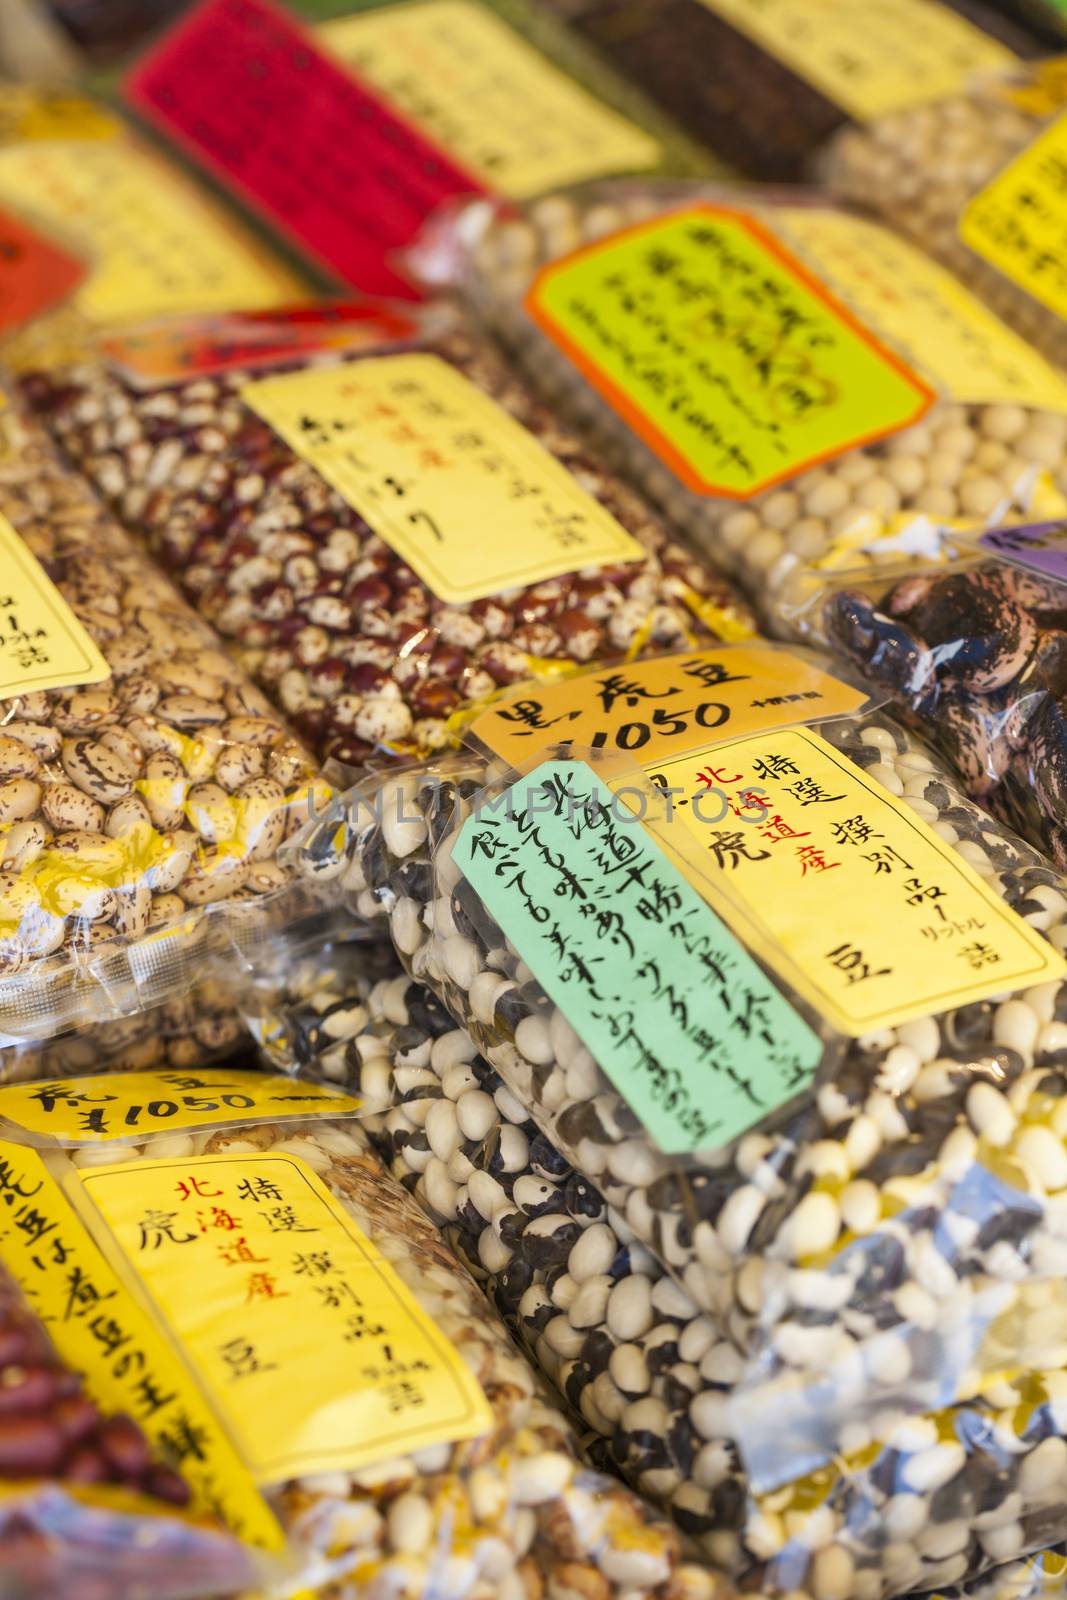 Sale of Japanese traditional products by mariusz_prusaczyk